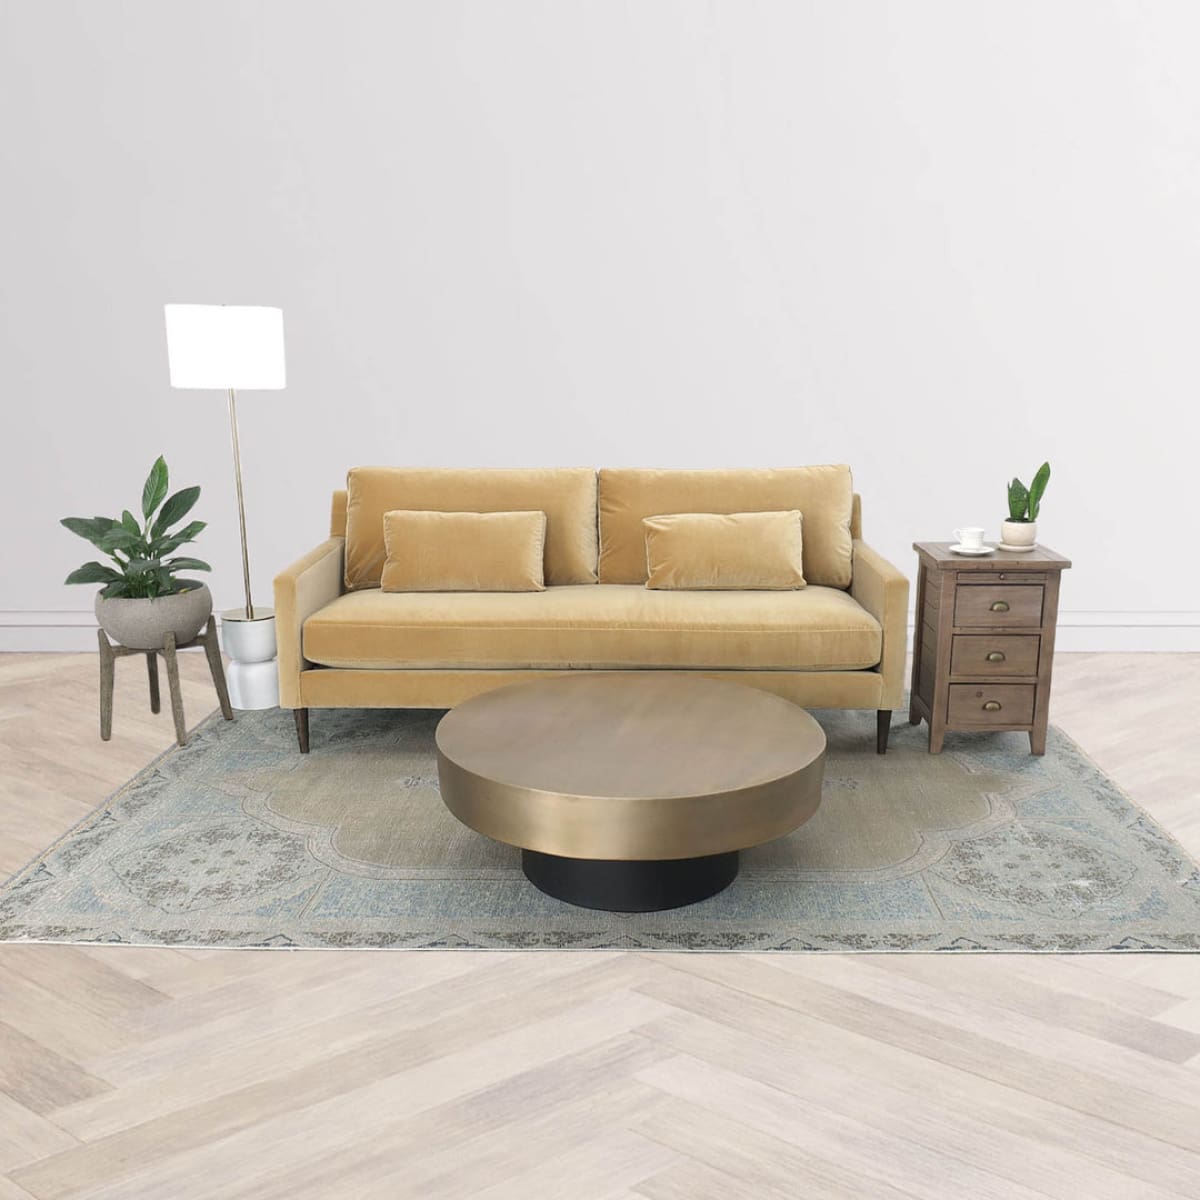 Chandra Coffee Table - lh-import-coffee-tables